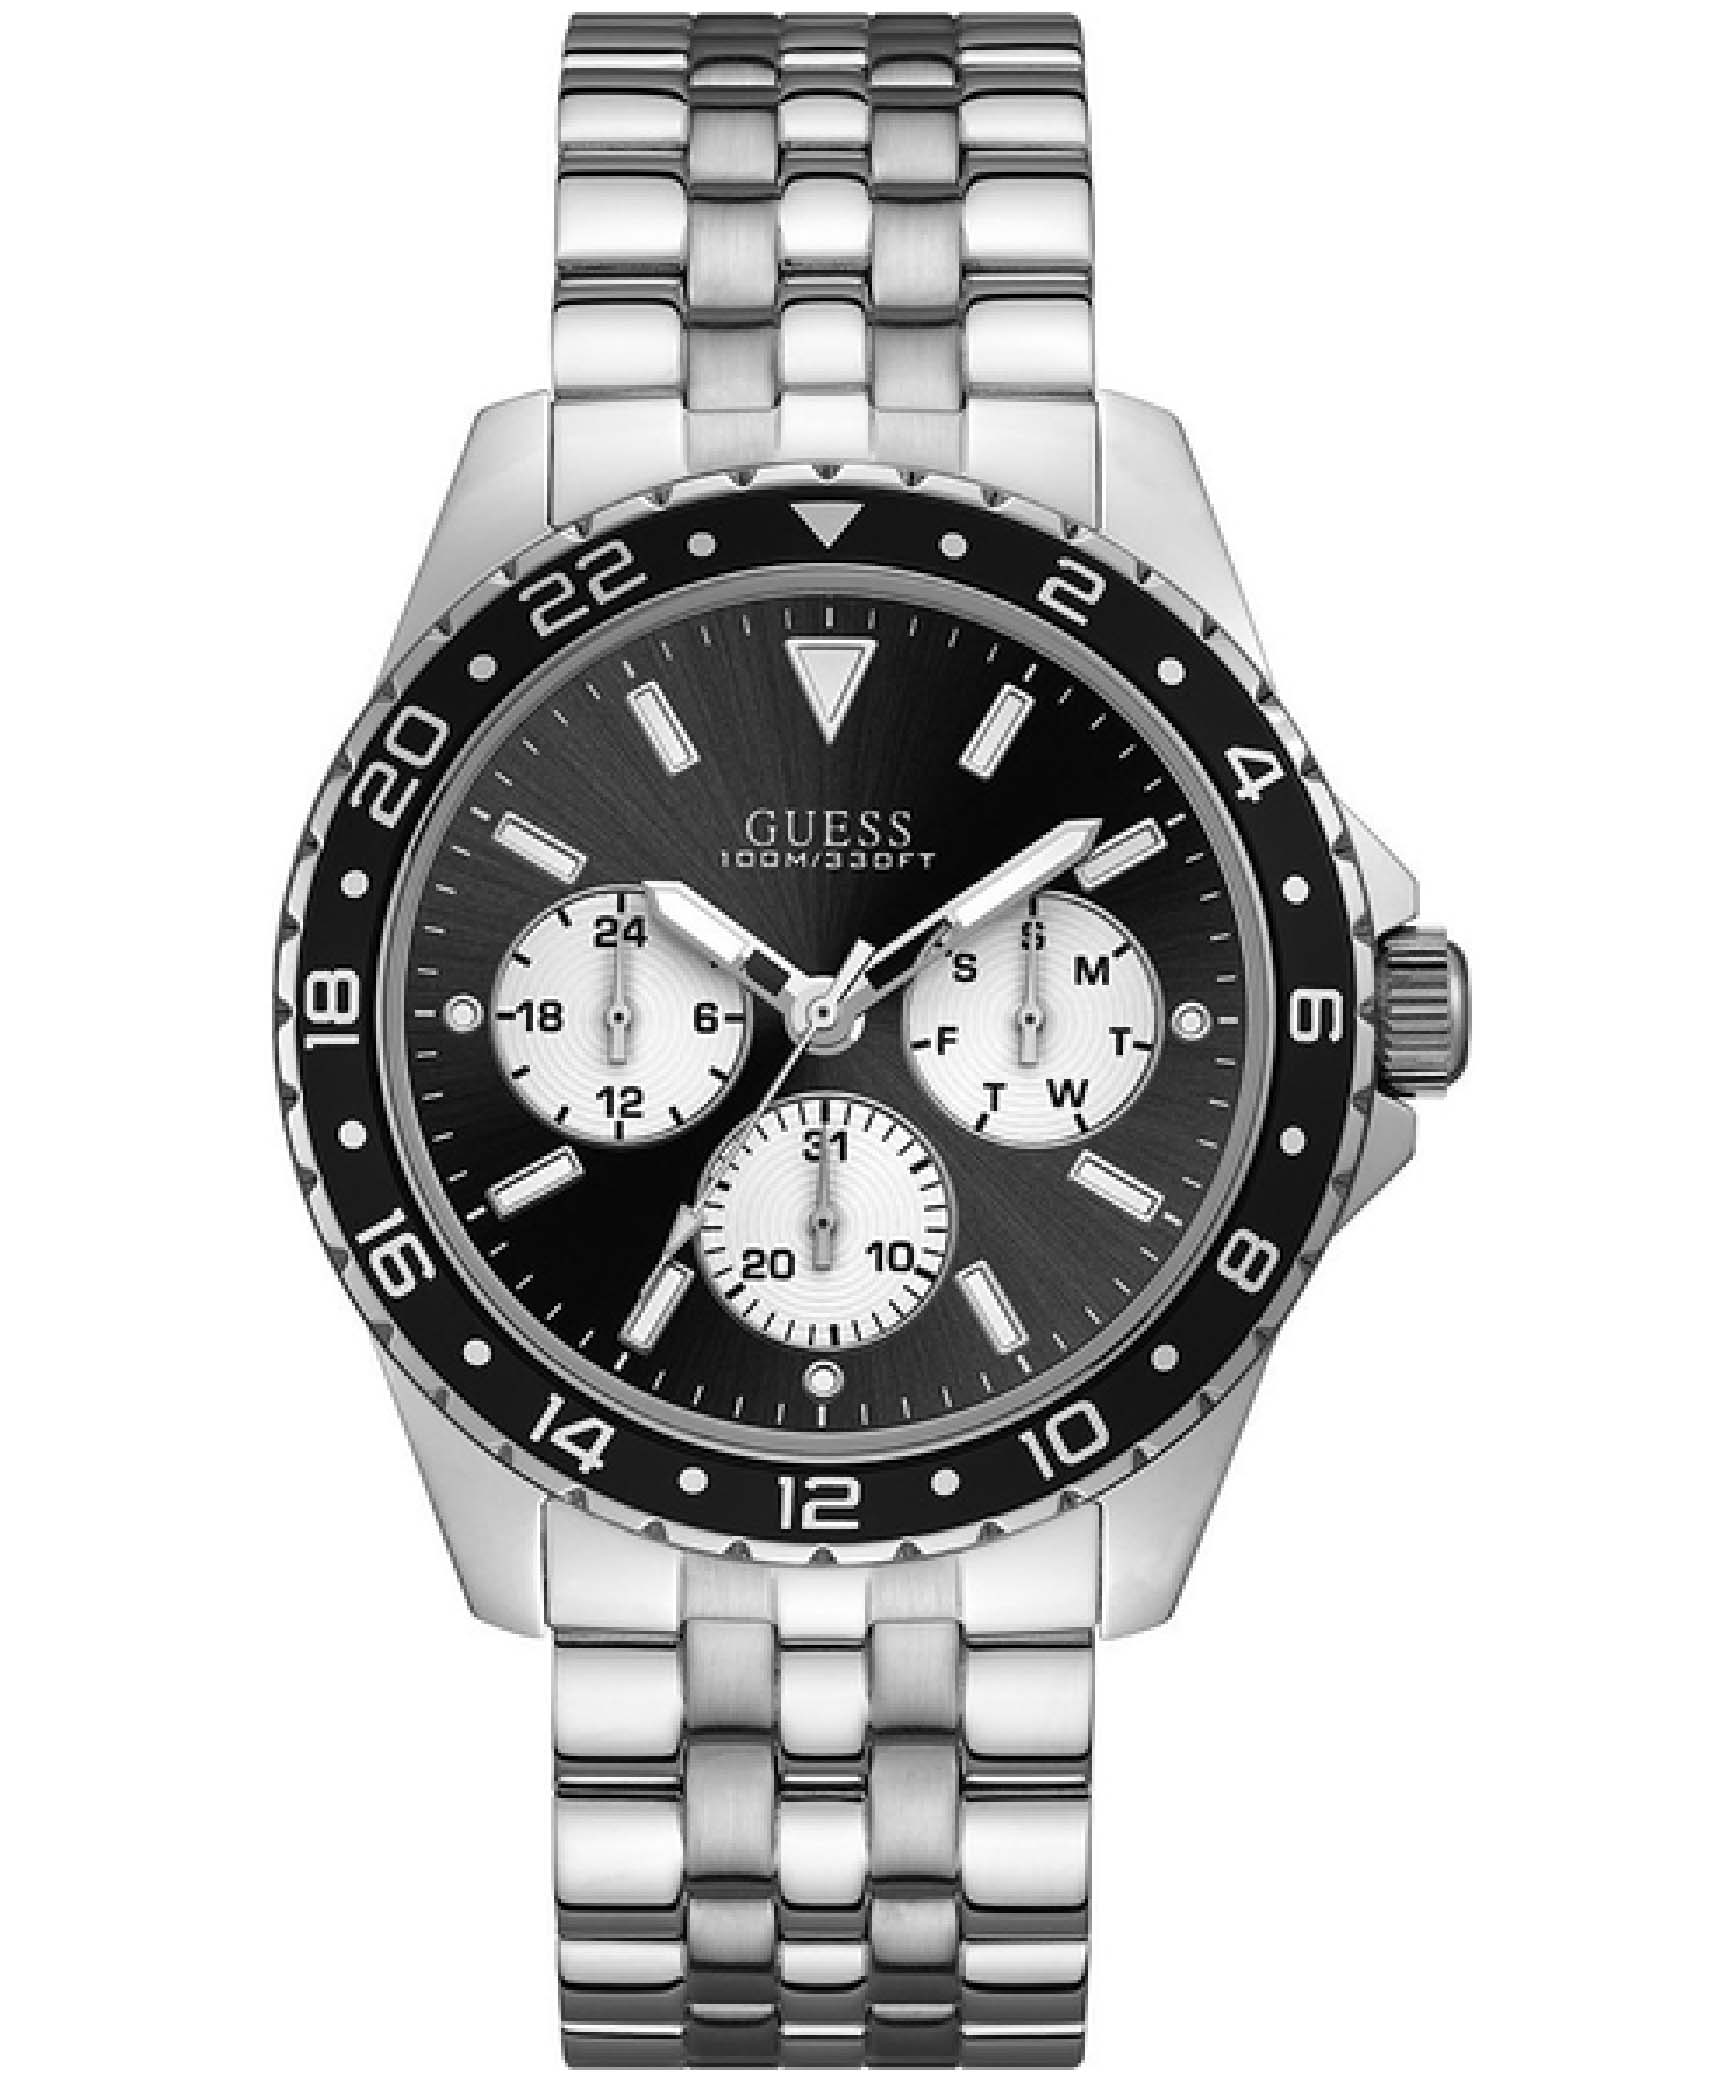 Guess, Men's Watch Analog, Odyssey Black & White Dial Silver Stainless Band